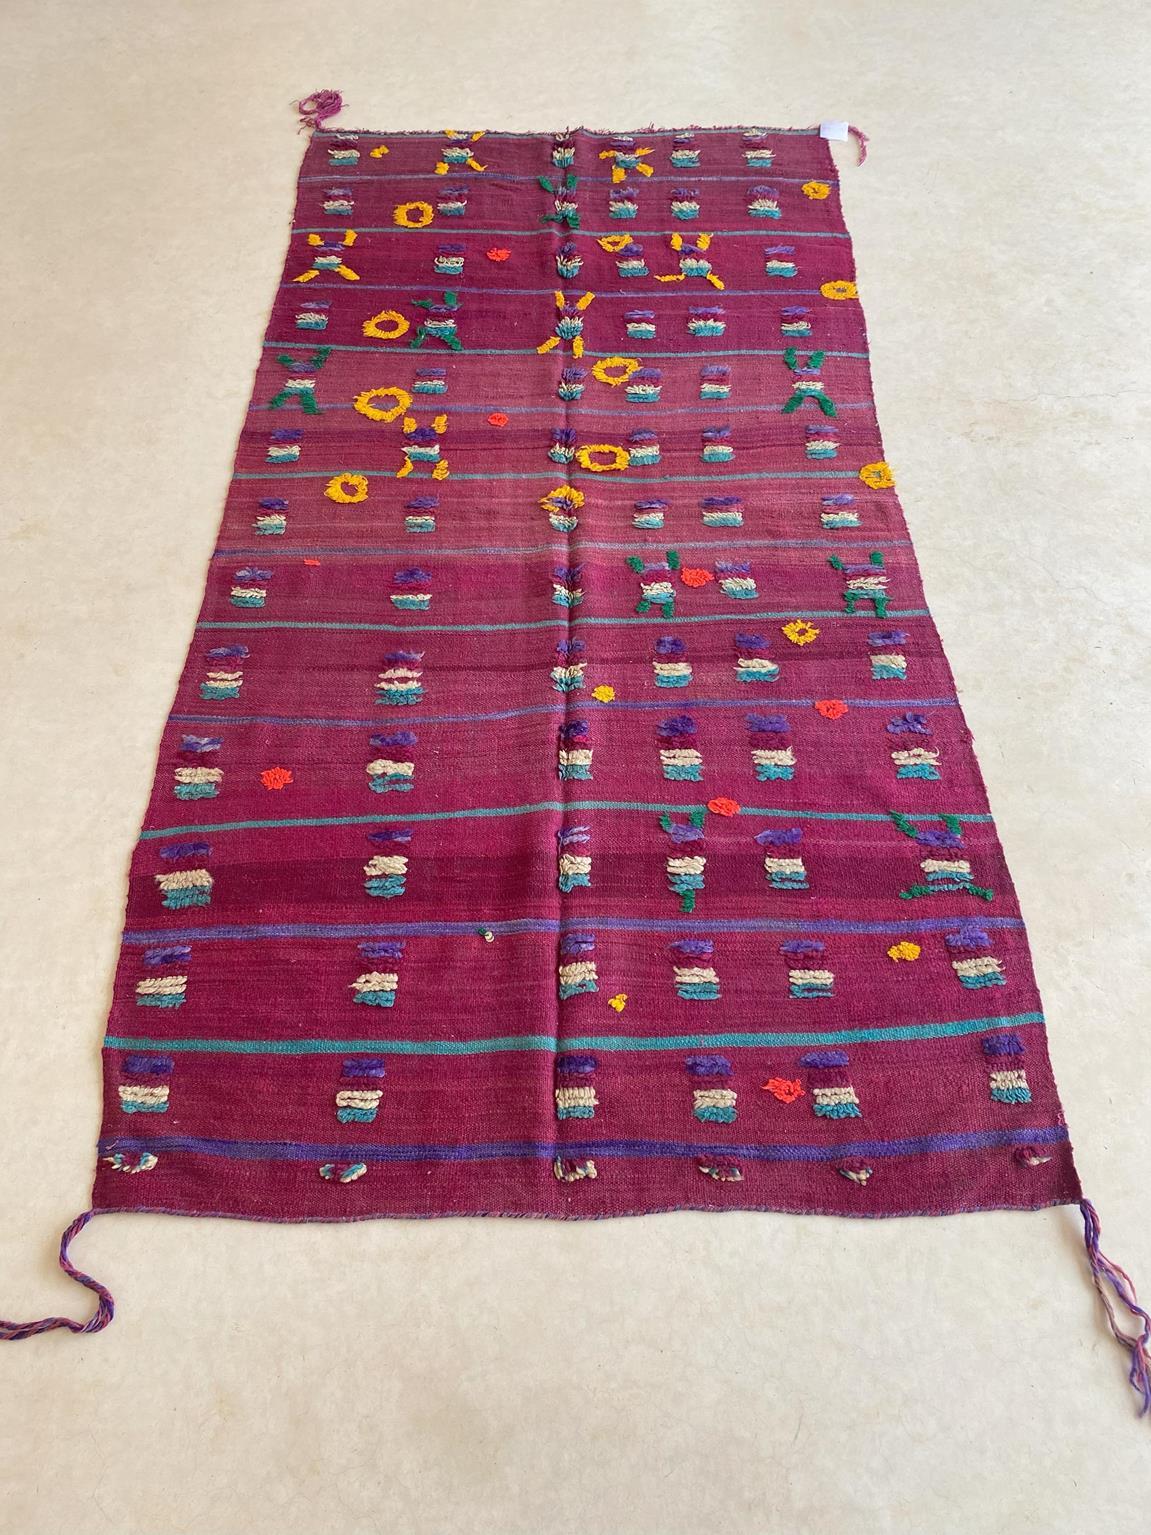 20th Century Vintage Moroccan Kilim textile - Purple and yellow - 4.1x8.3feet / 127x252cm For Sale